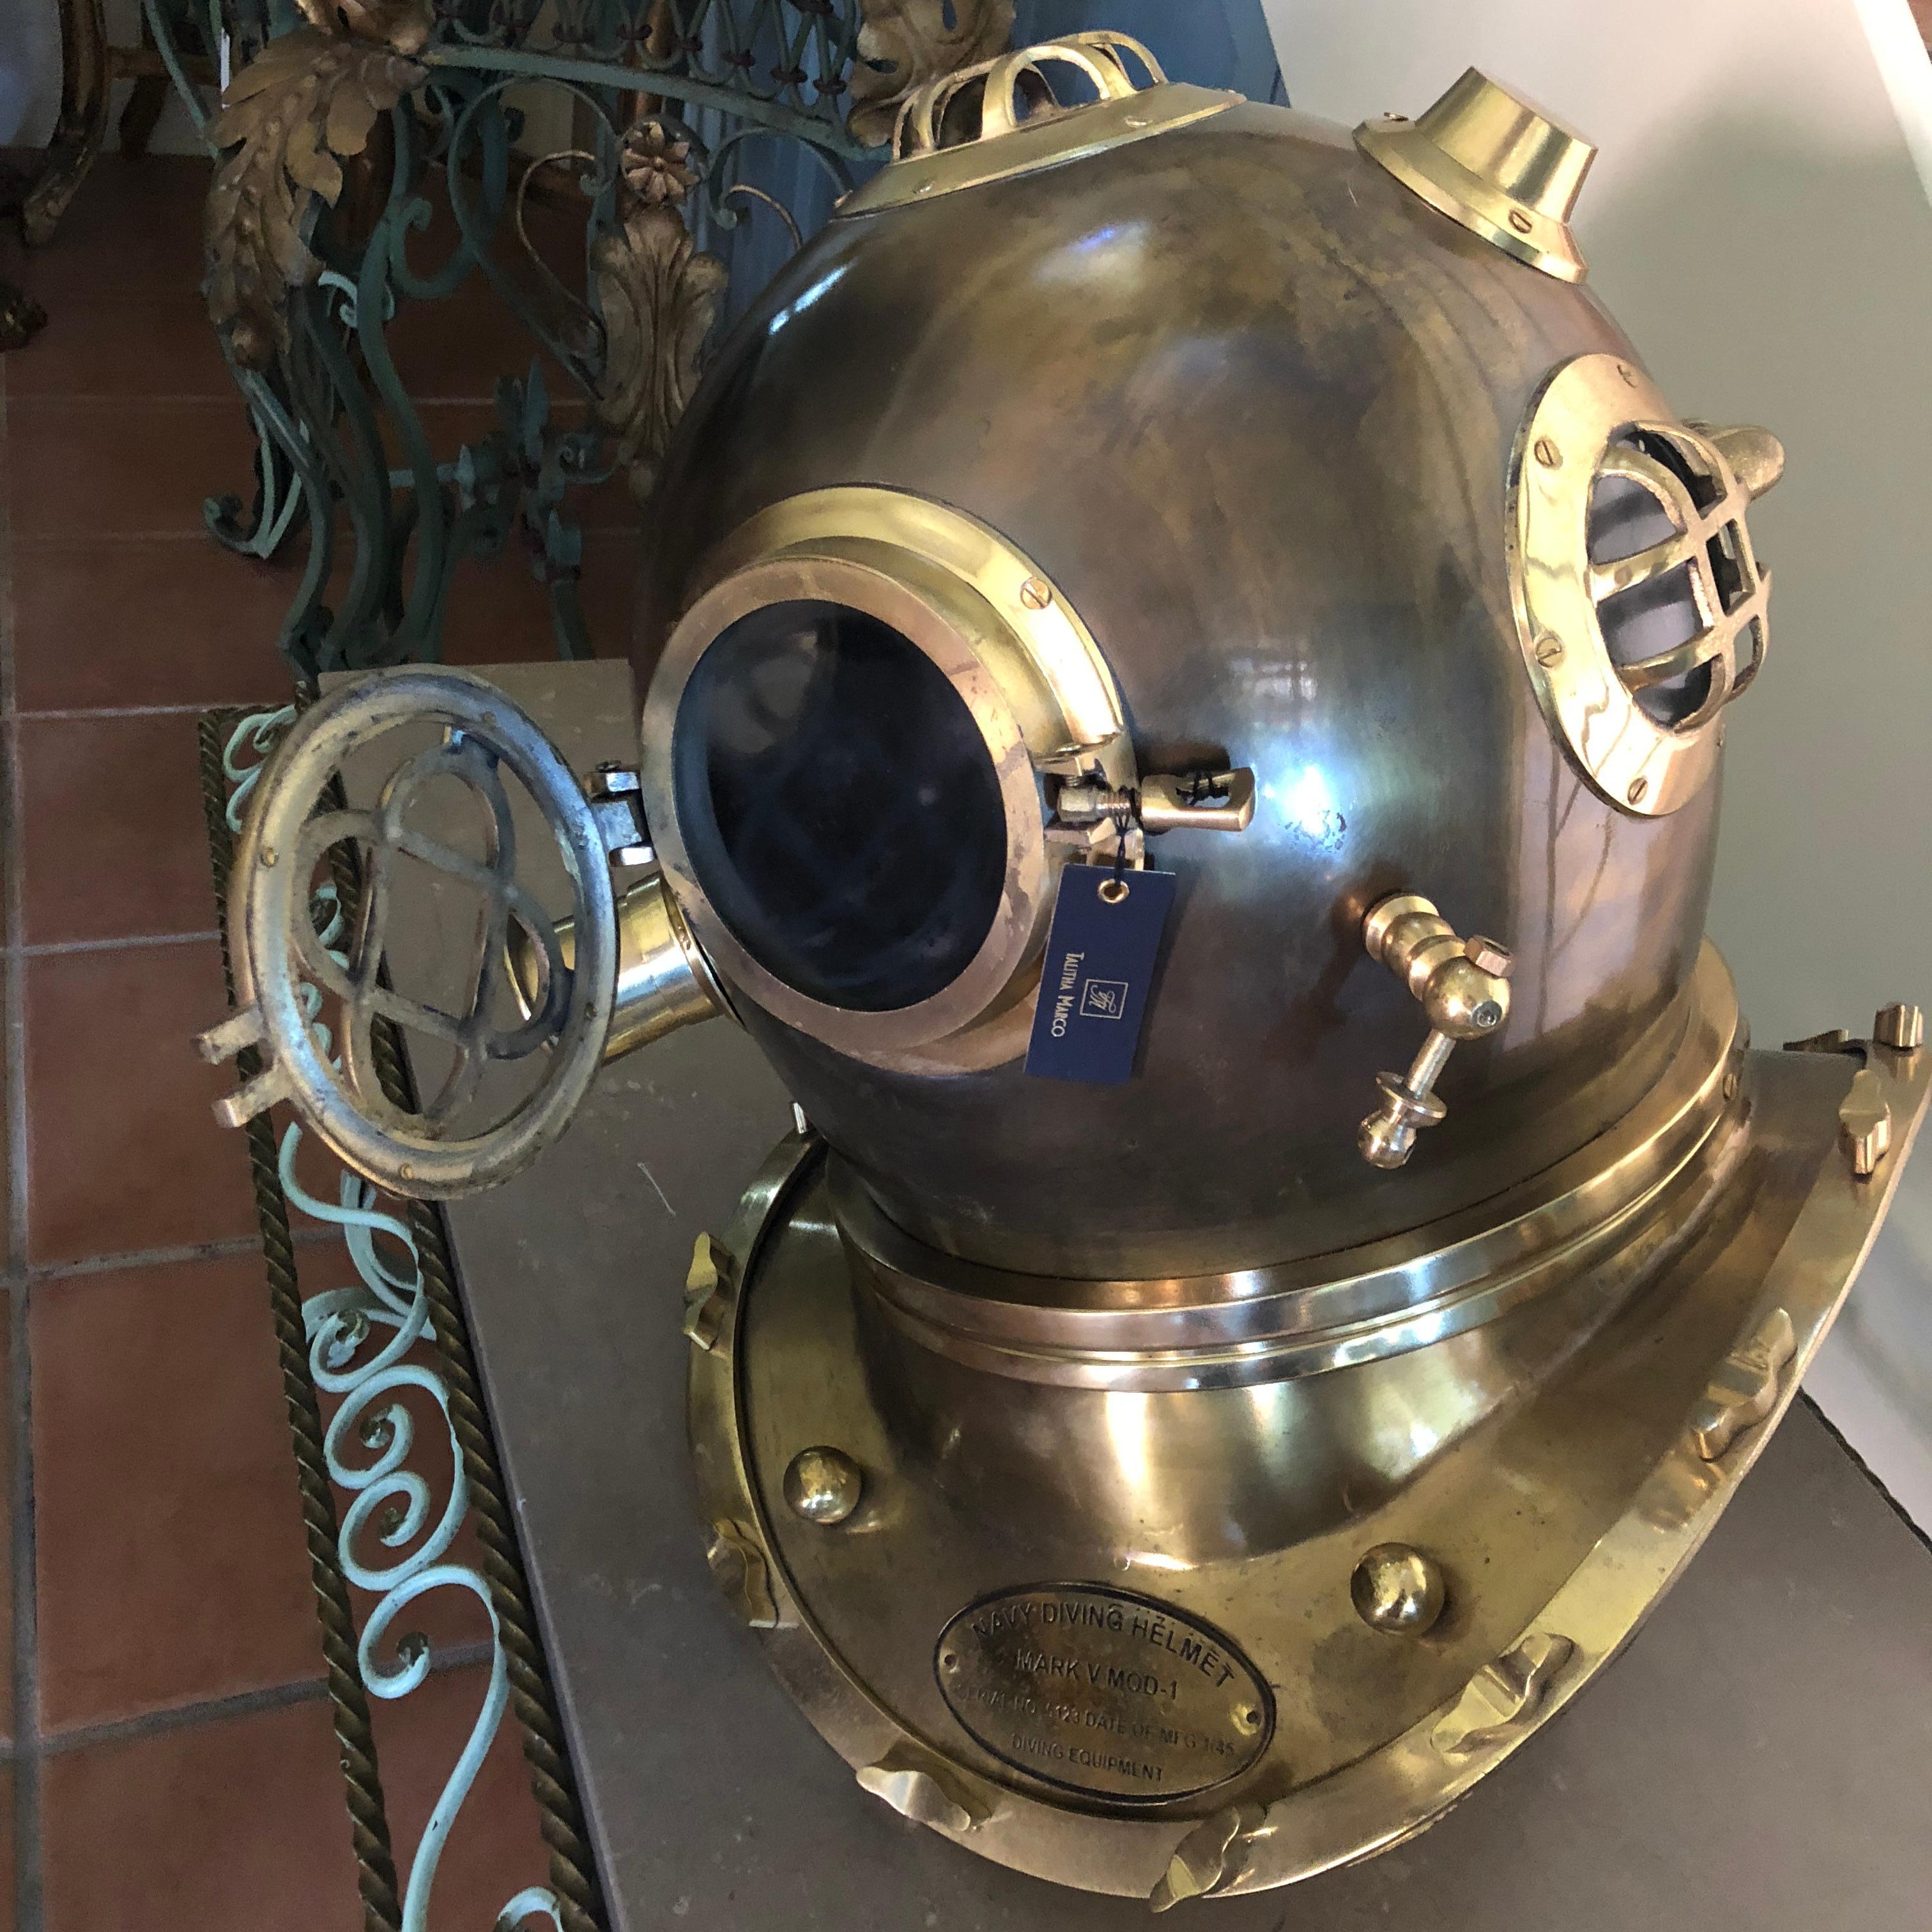 A beautiful decorative piece suitable for a nautical themed pool house or stylish office. This American Navy Diving Helmet, is a Mark V 20th century reproduction, featuring brass casing with bronze adornments. This helmet is a beautiful condition